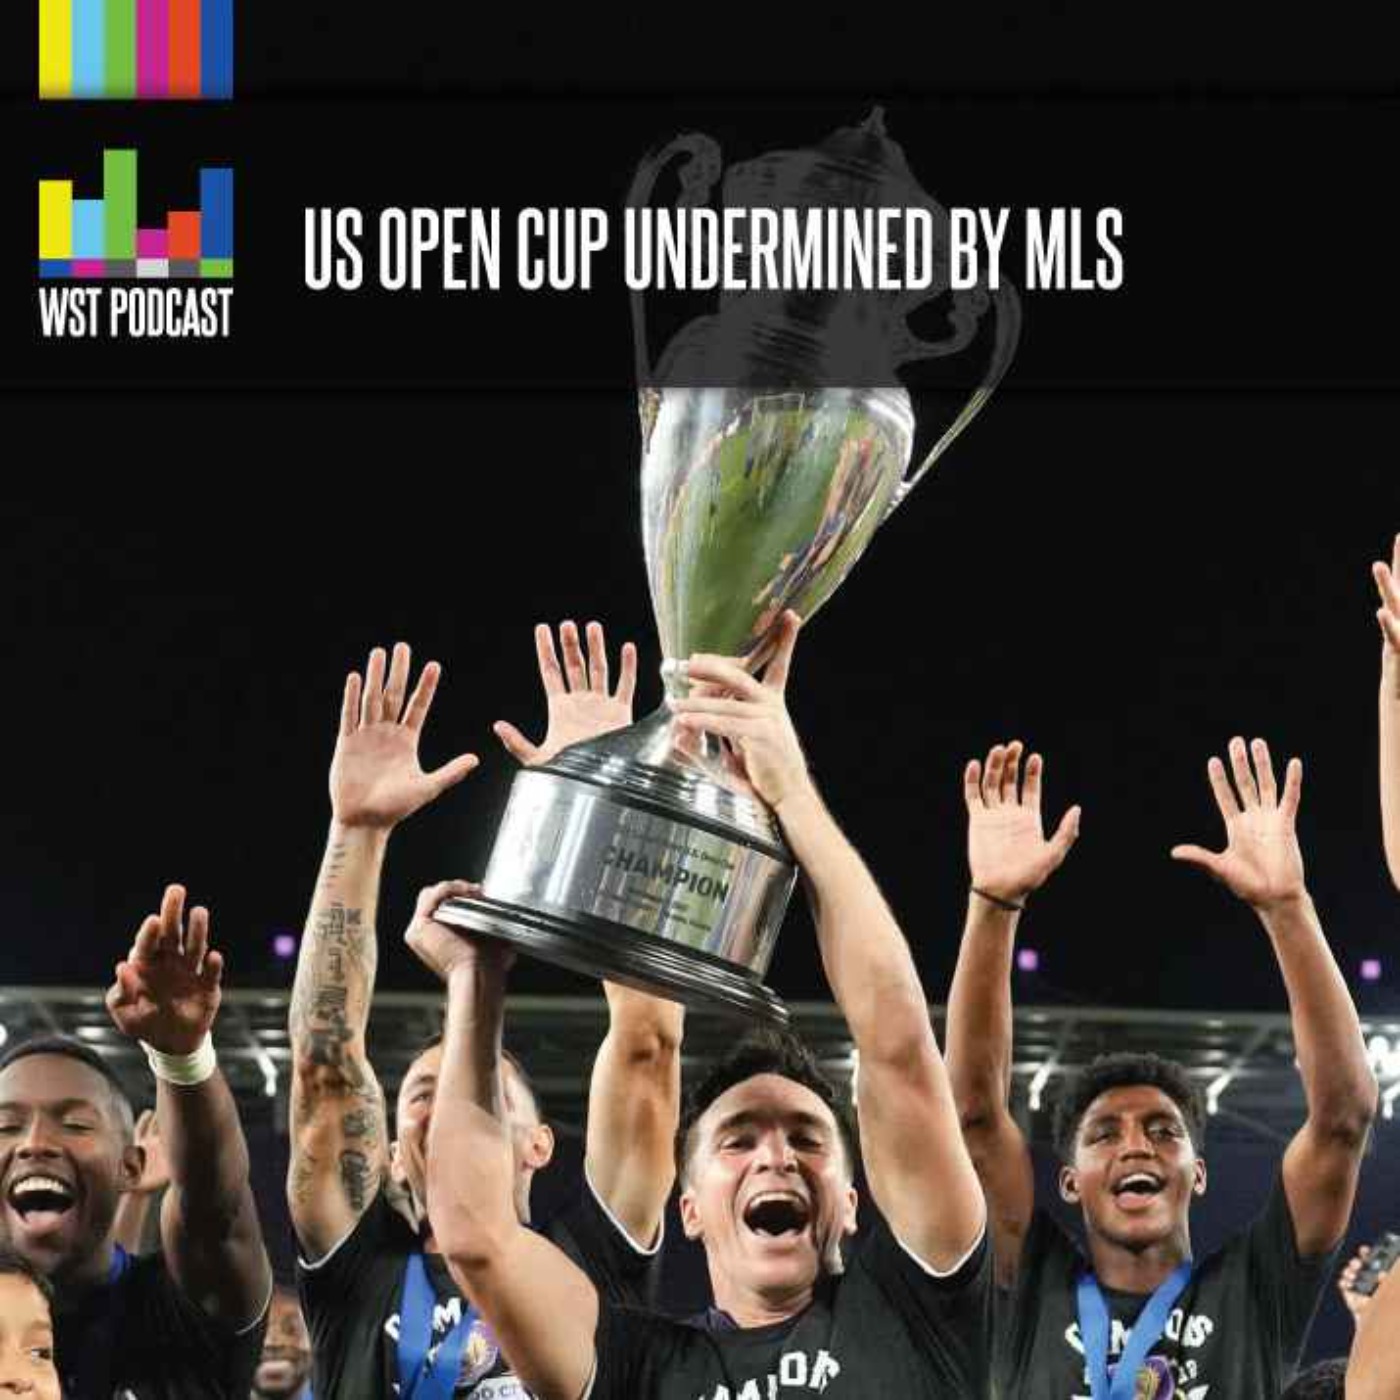 US Open Cup being undermined by MLS